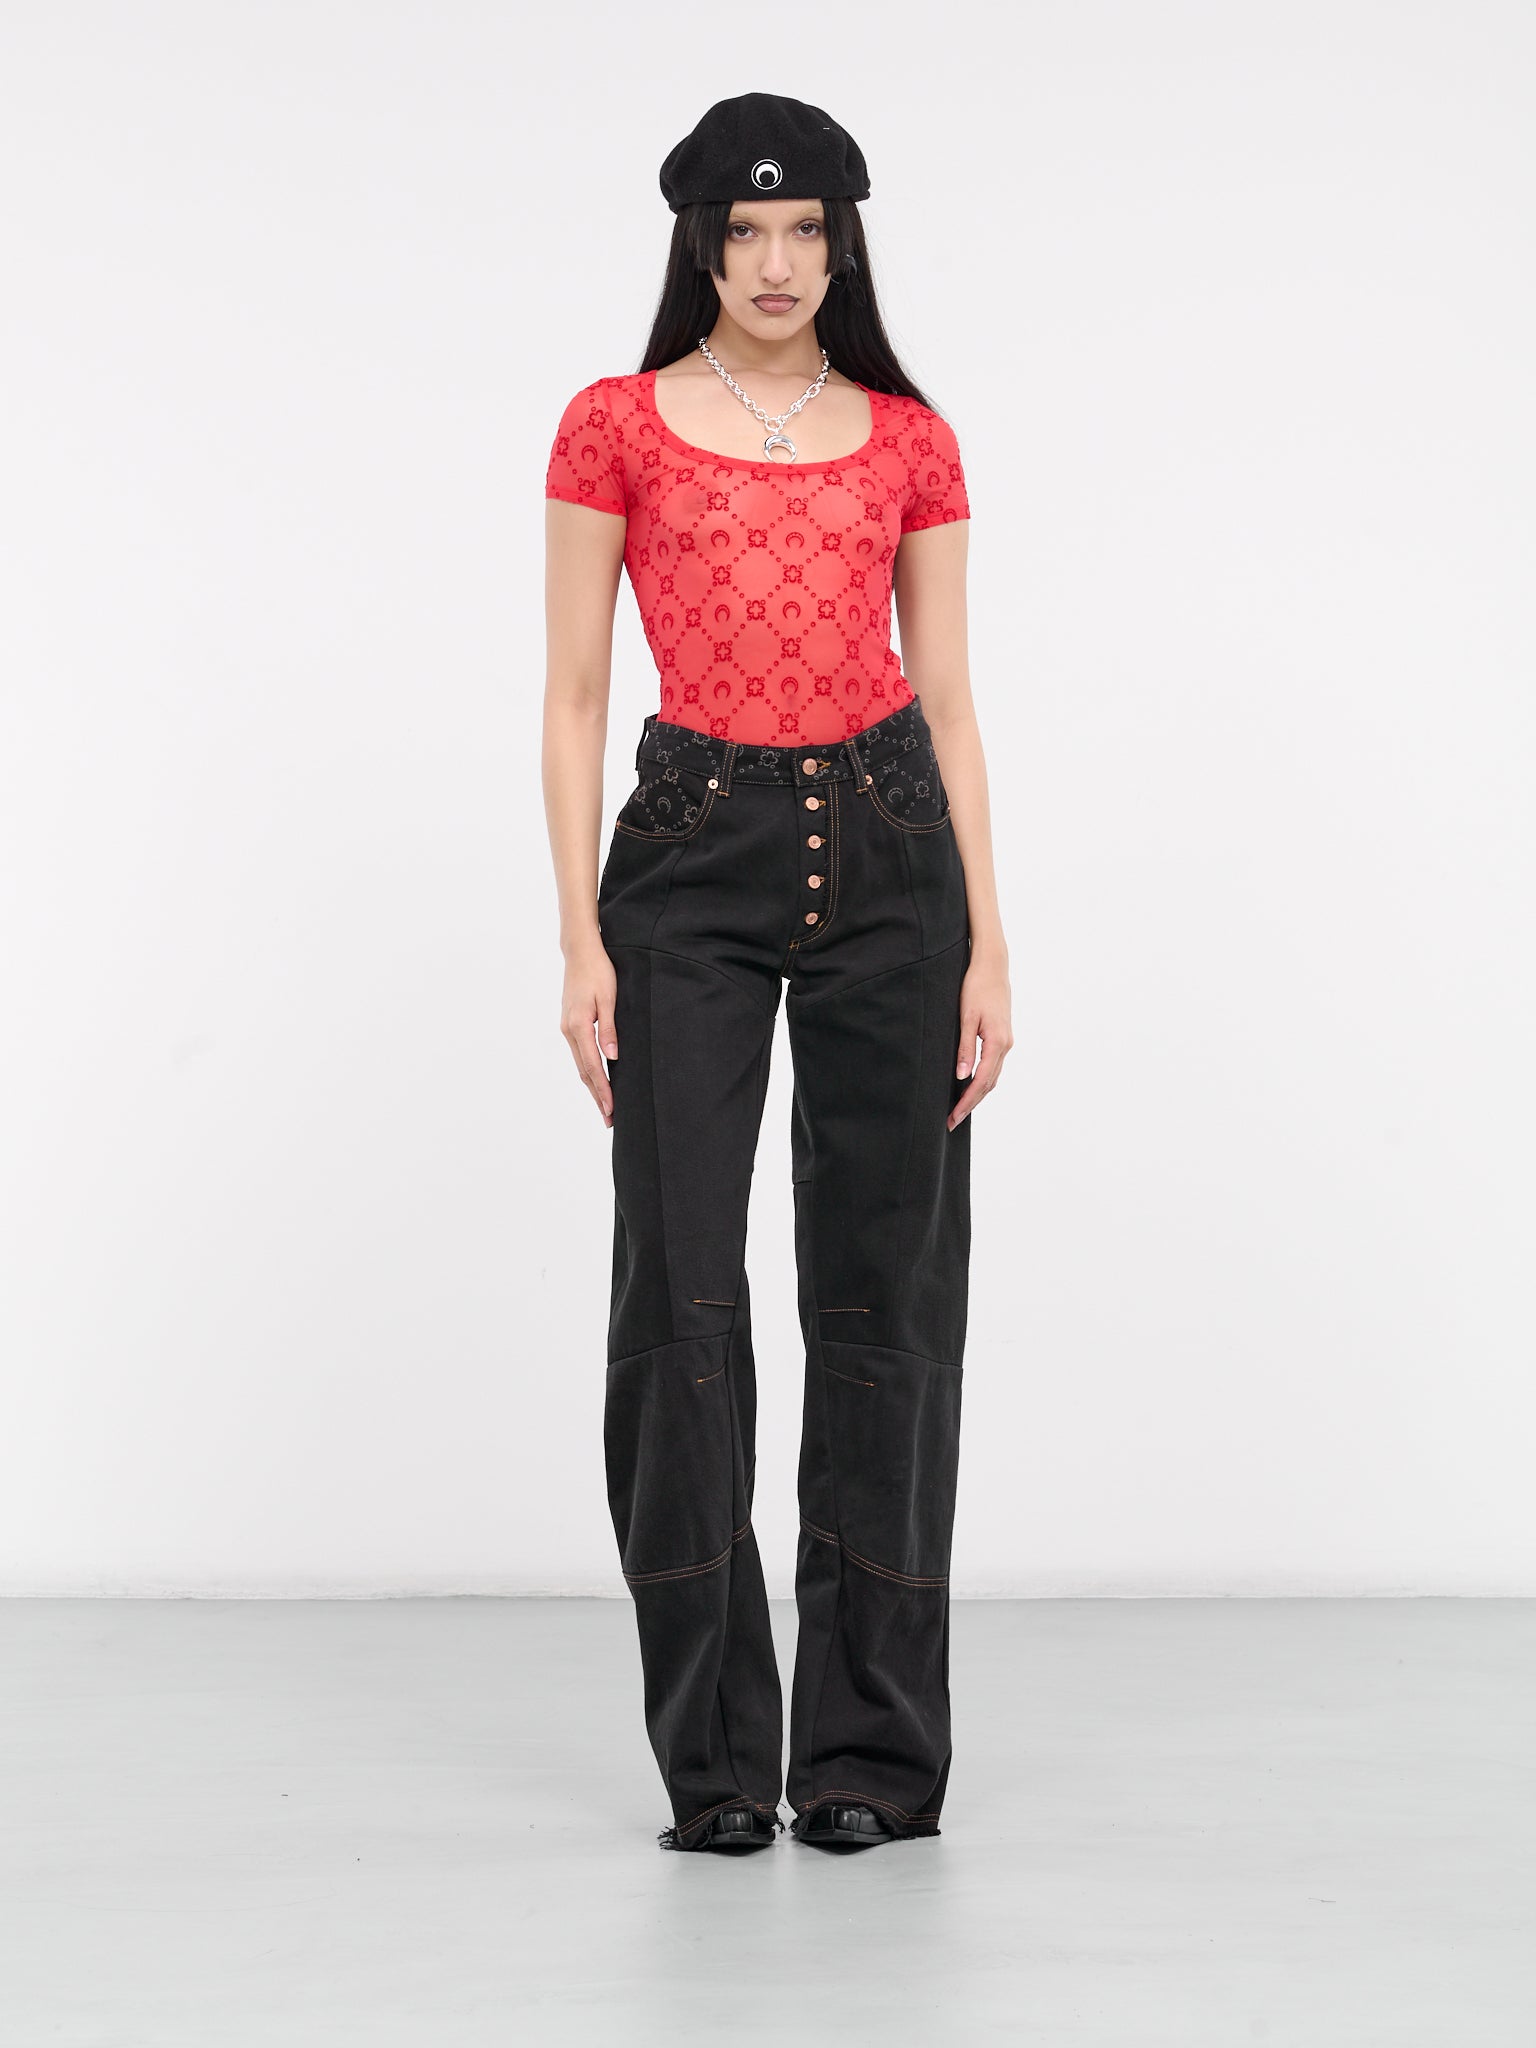 Monogram Mesh Fitted Top (WTO389-CJER0005-RED)